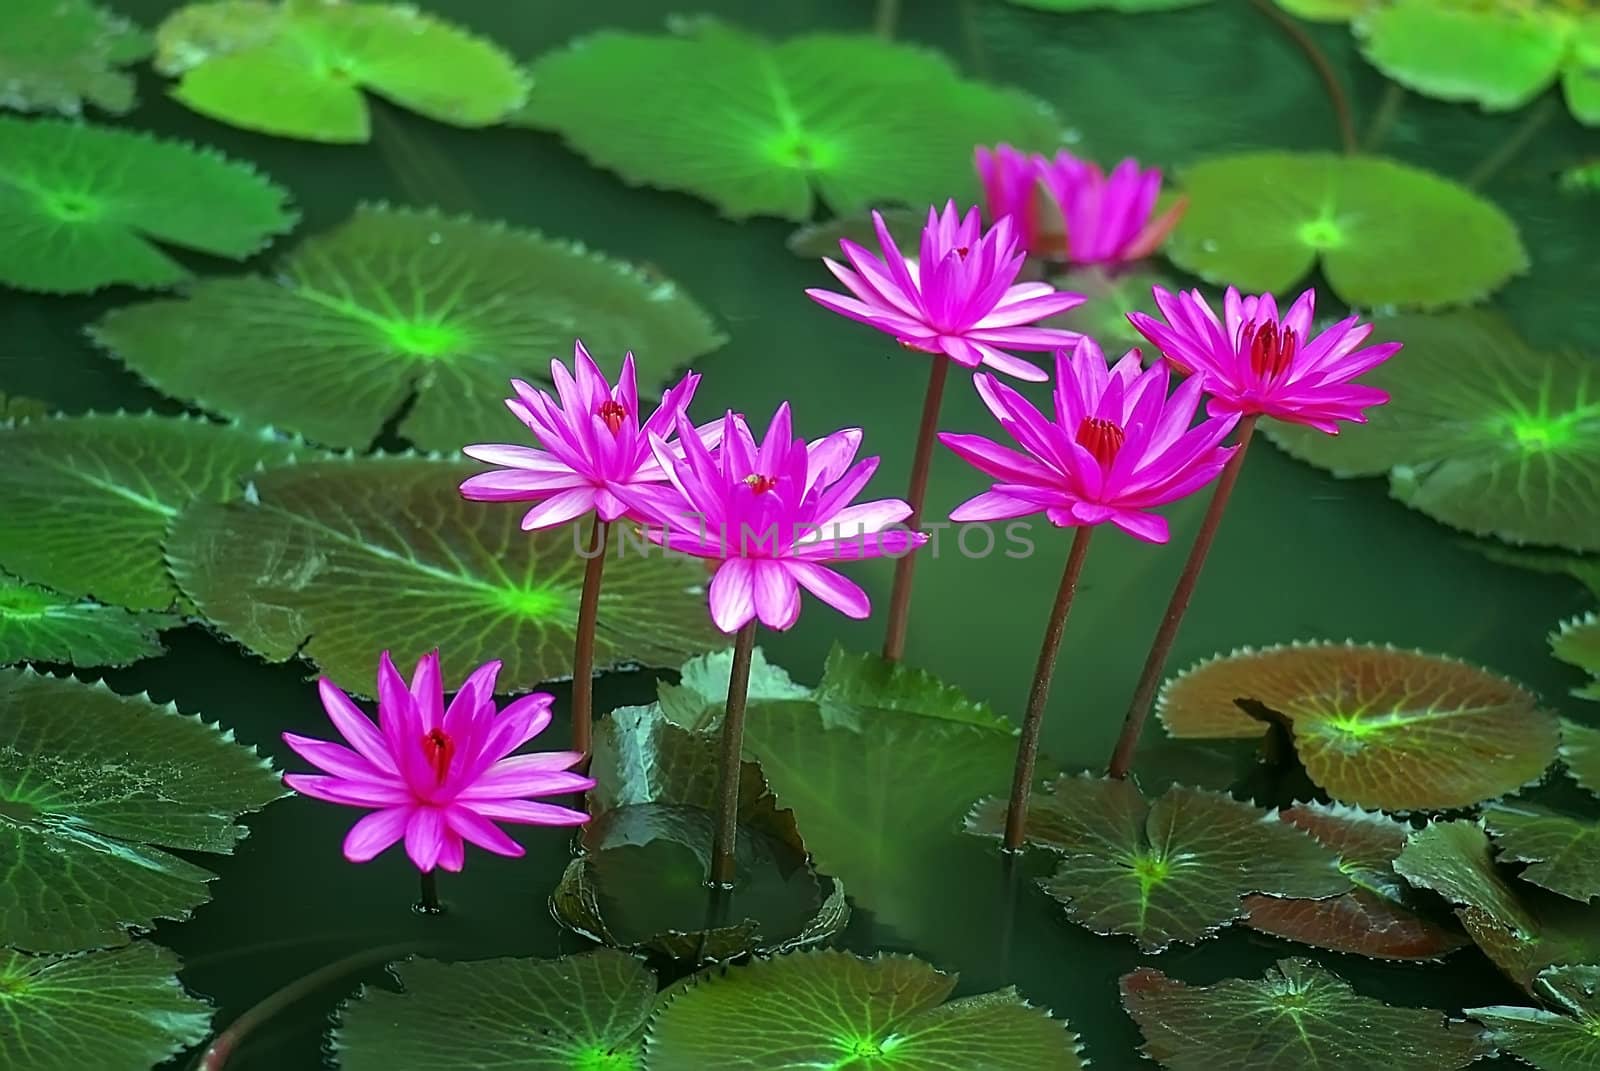 Water lily in full bloom in the pond by xfdly5